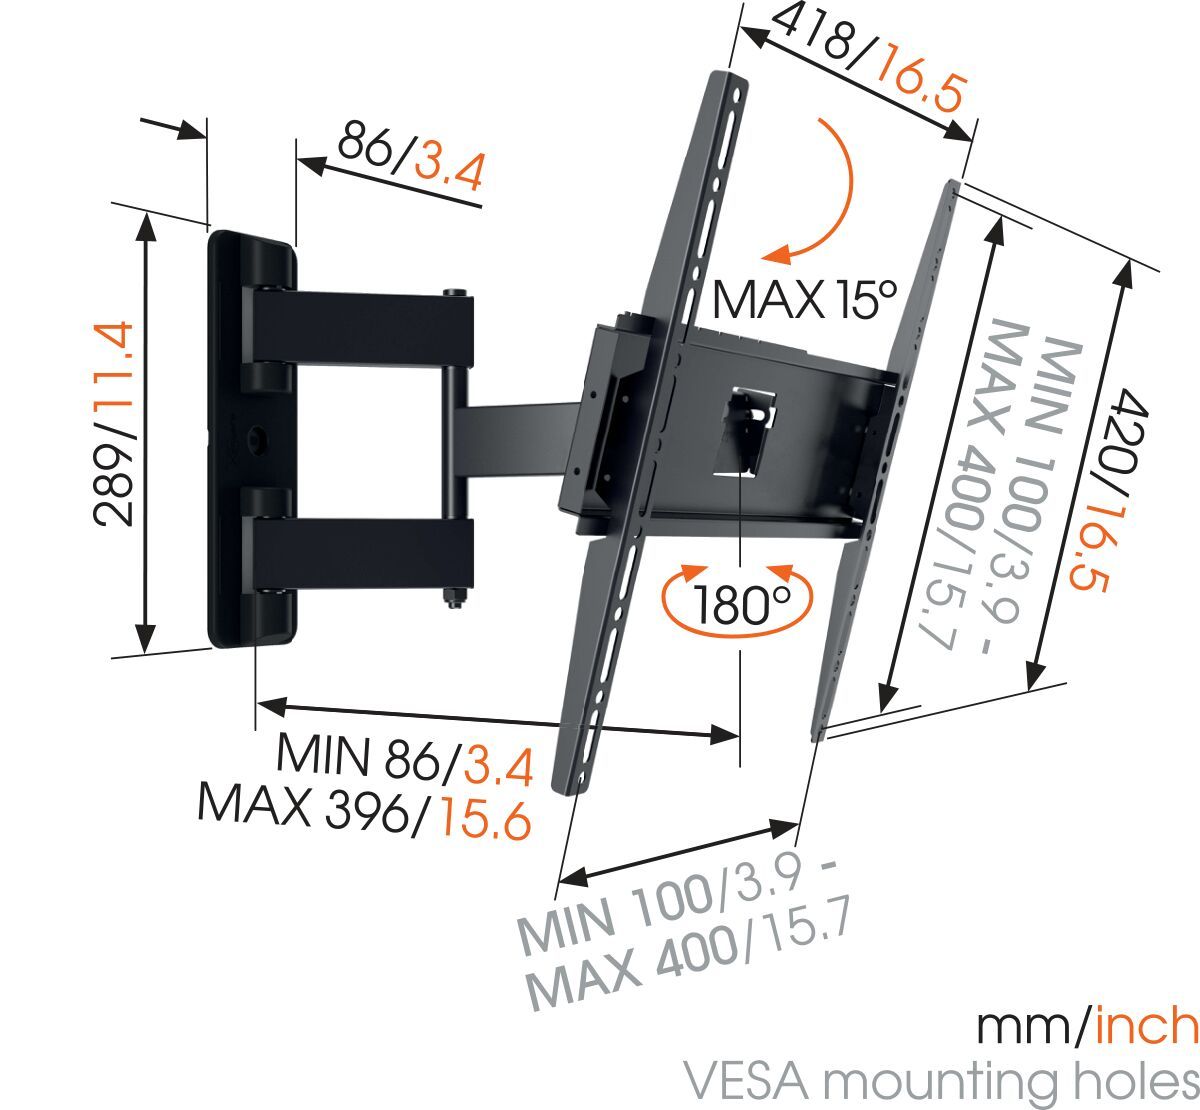 Vogel's MA 3040 Full-Motion TV Wall Mount - Suitable for 32 up to 65 inch TVs - Full motion (up to 180°) - Tilt up to 10° - Dimensions